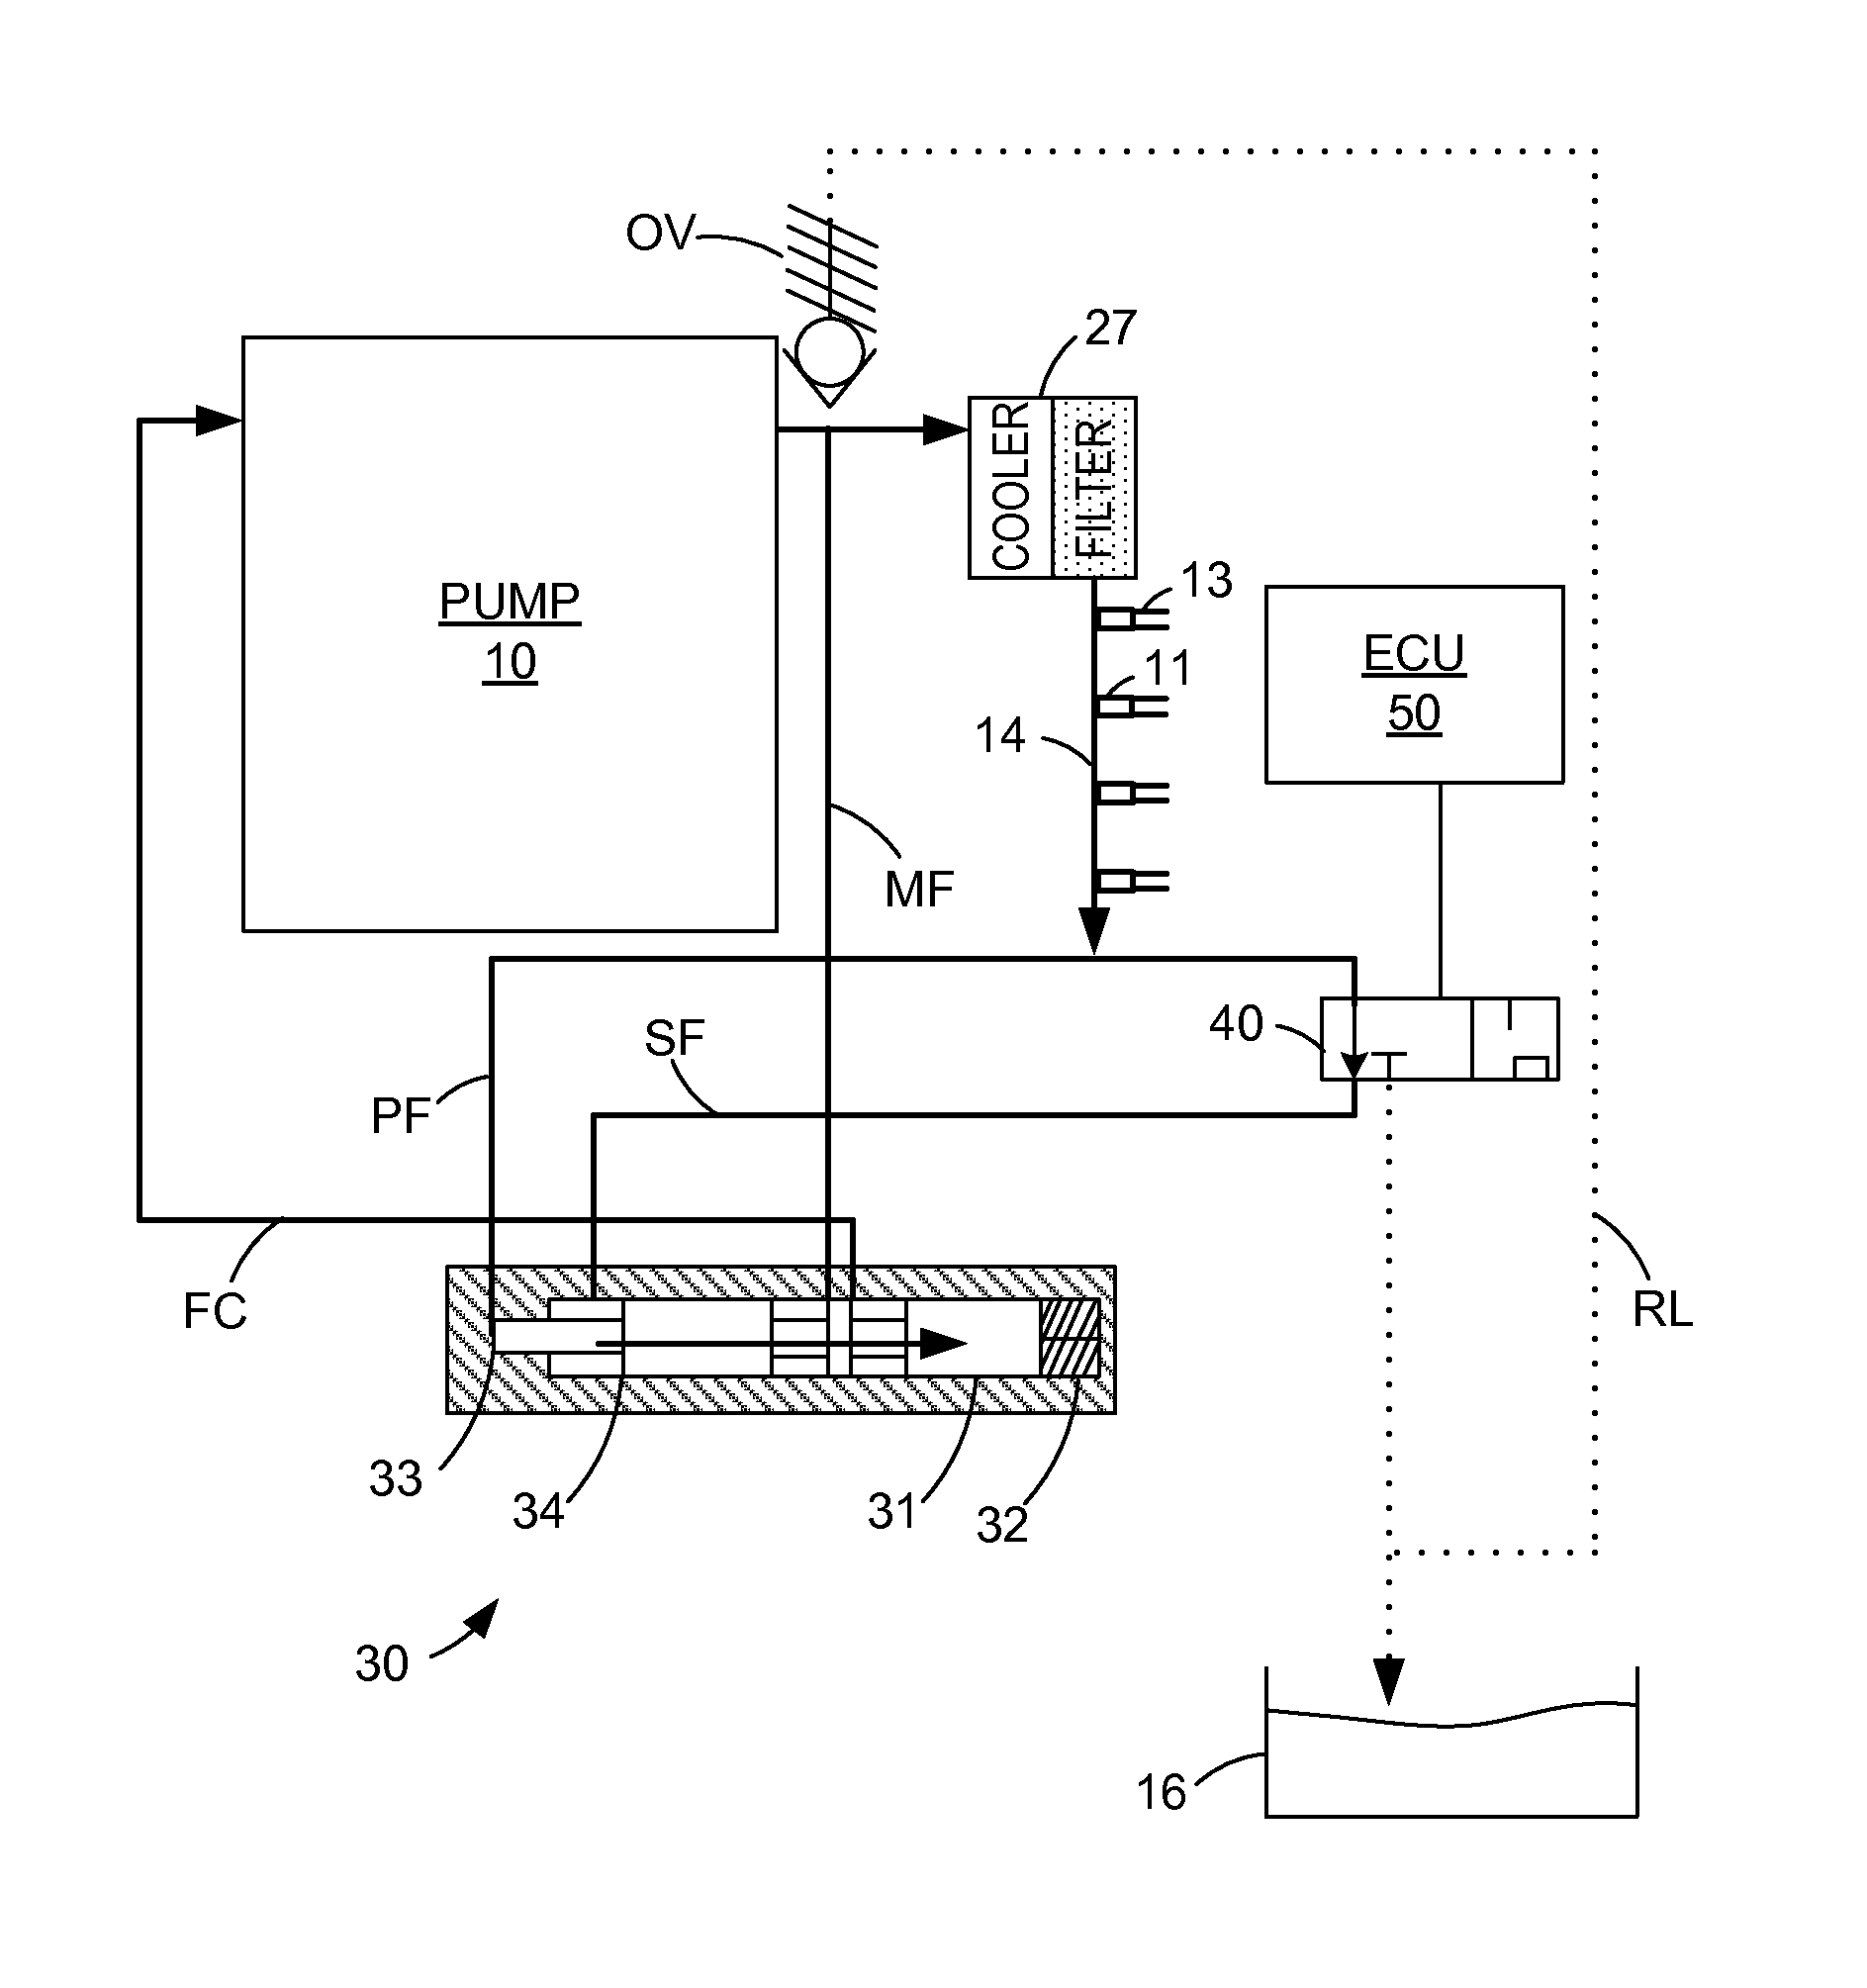 Oil supply system for an engine